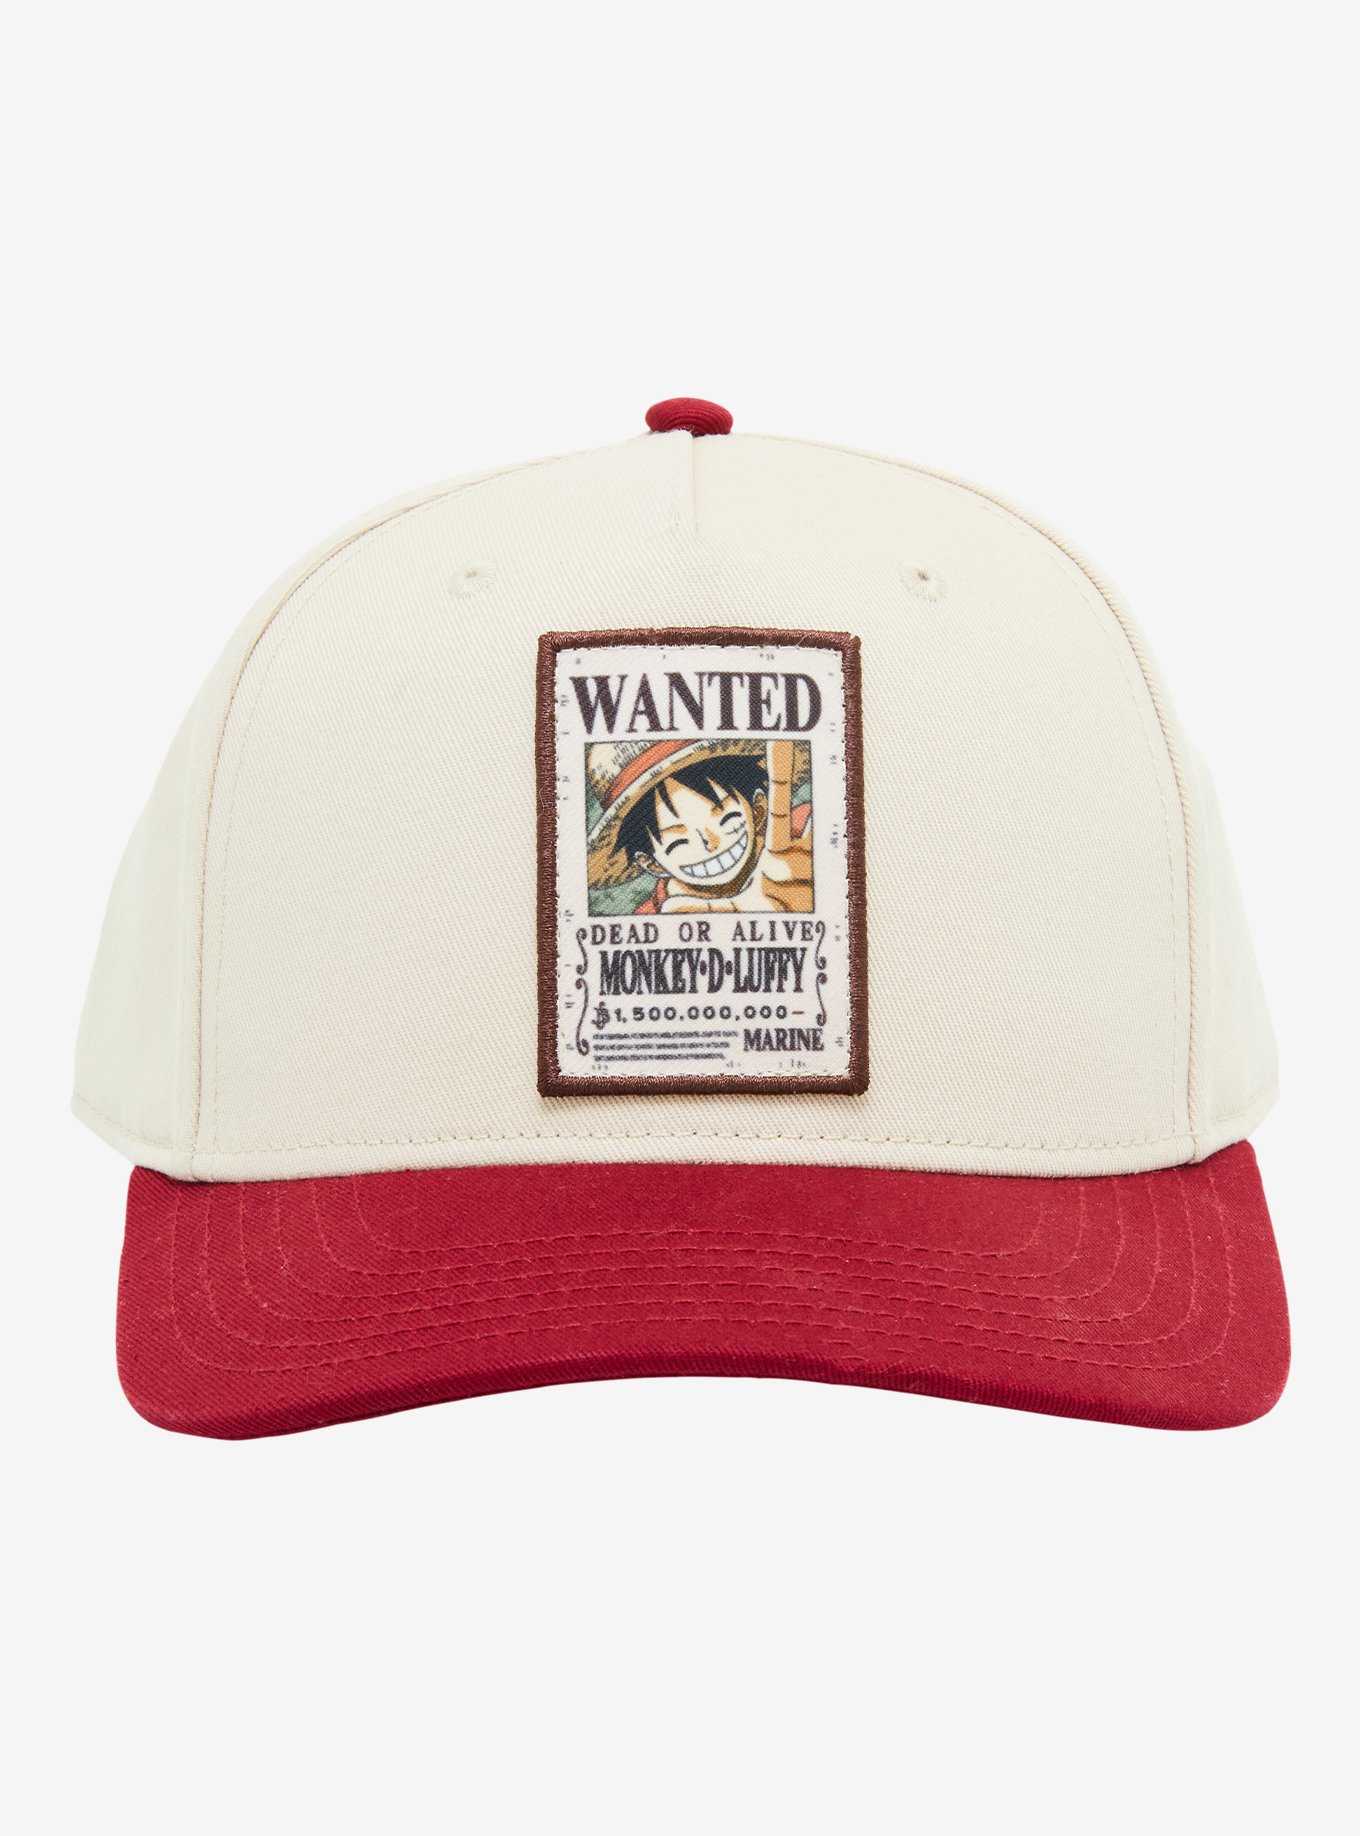 One Piece Monkey D. Luffy Wanted Poster Cap - BoxLunch Exclusive, , hi-res